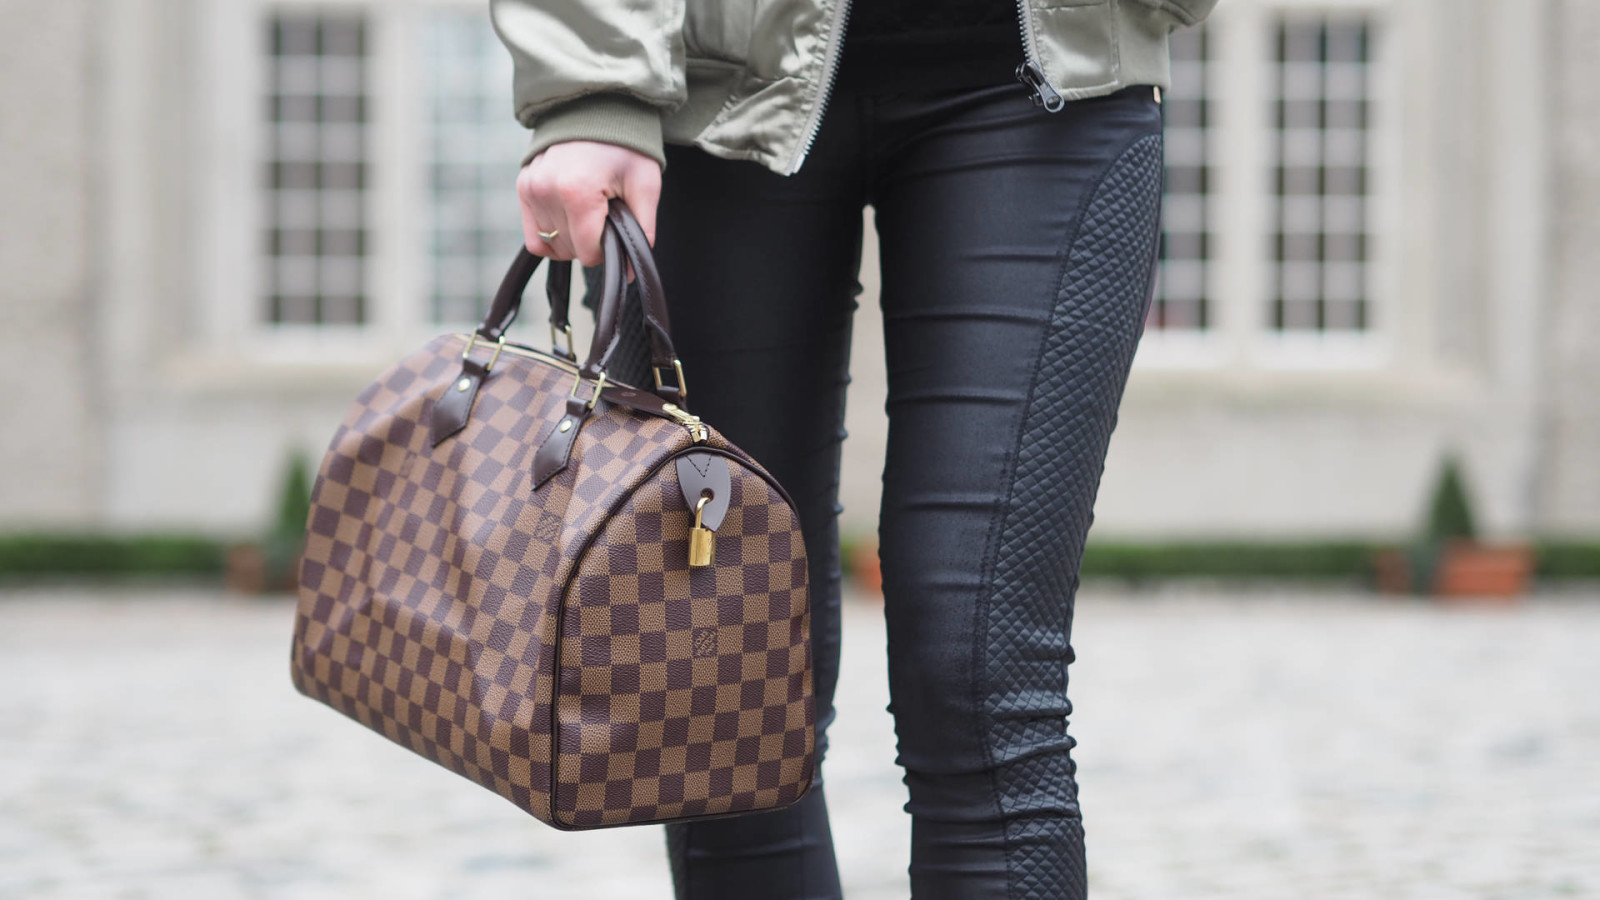 10 TIPS FOR BUYING YOUR FIRST DESIGNER BAG